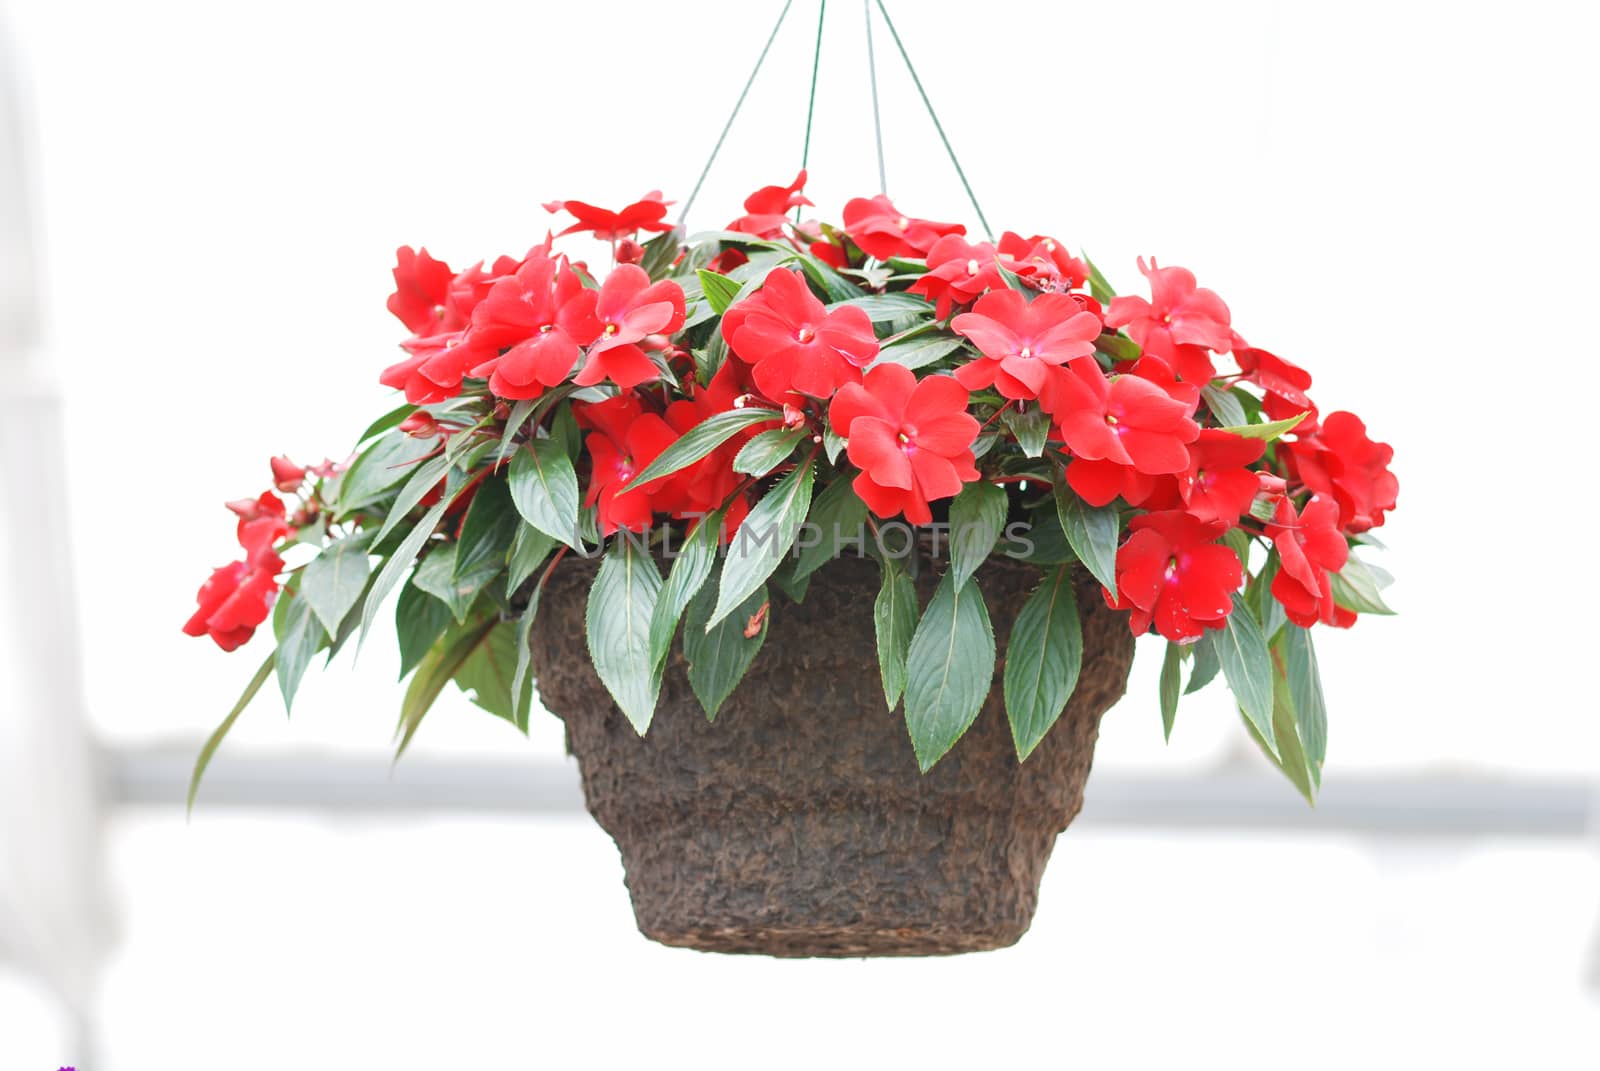 impatiens in potted, scientific name Impatiens walleriana flower by yuiyuize